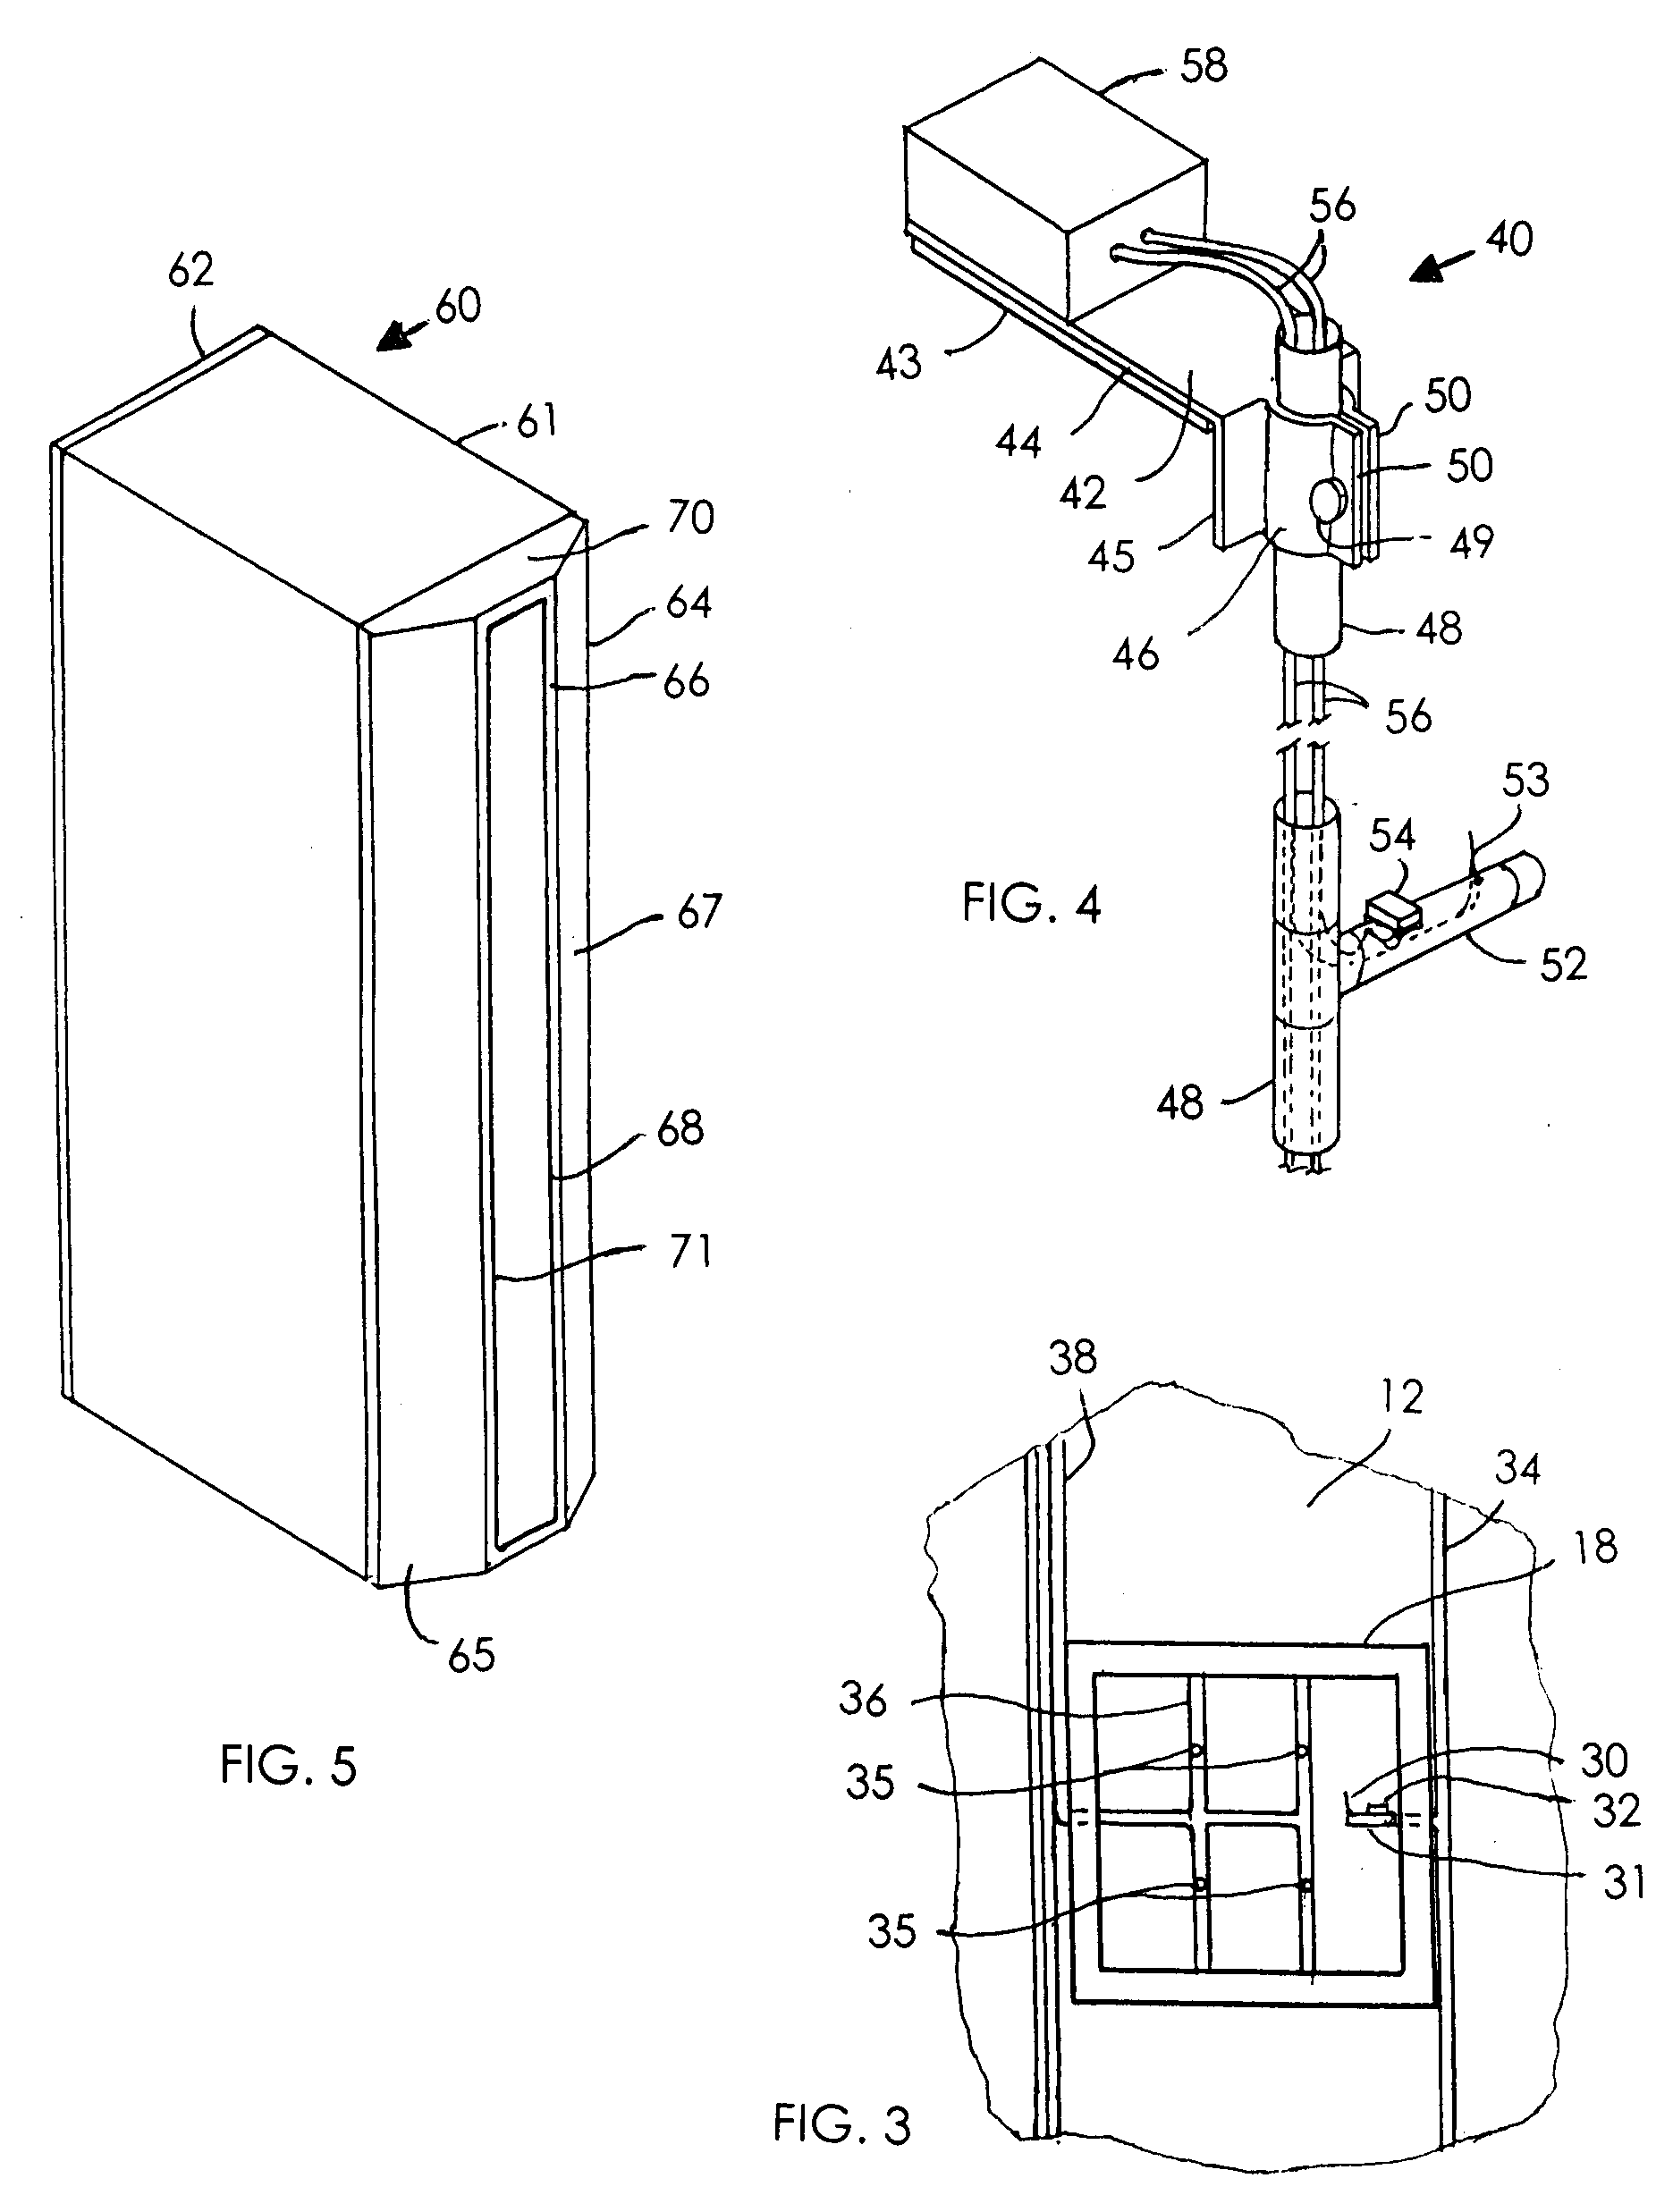 Heat Flow Measurement Tool for a Rack Mounted Assembly of Electronic Equipment